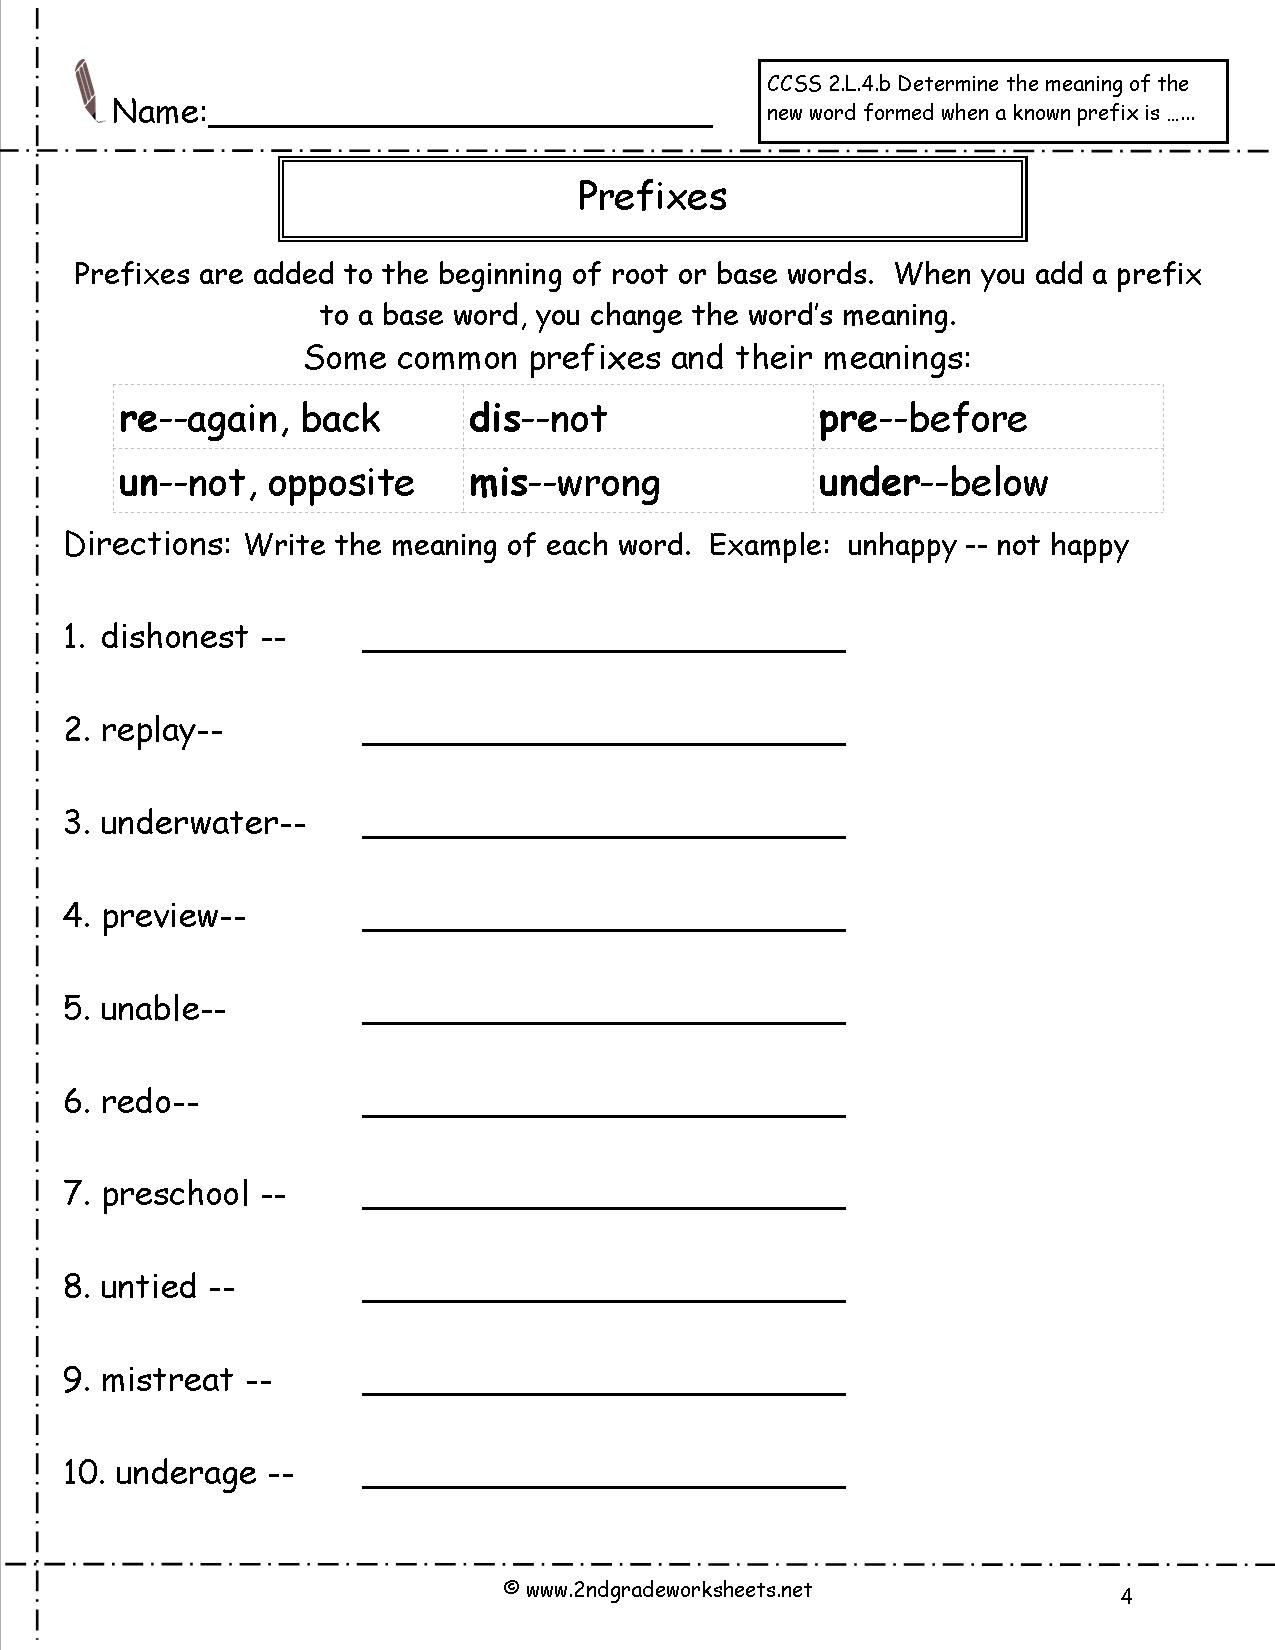 free-suffix-worksheets-3rd-grade